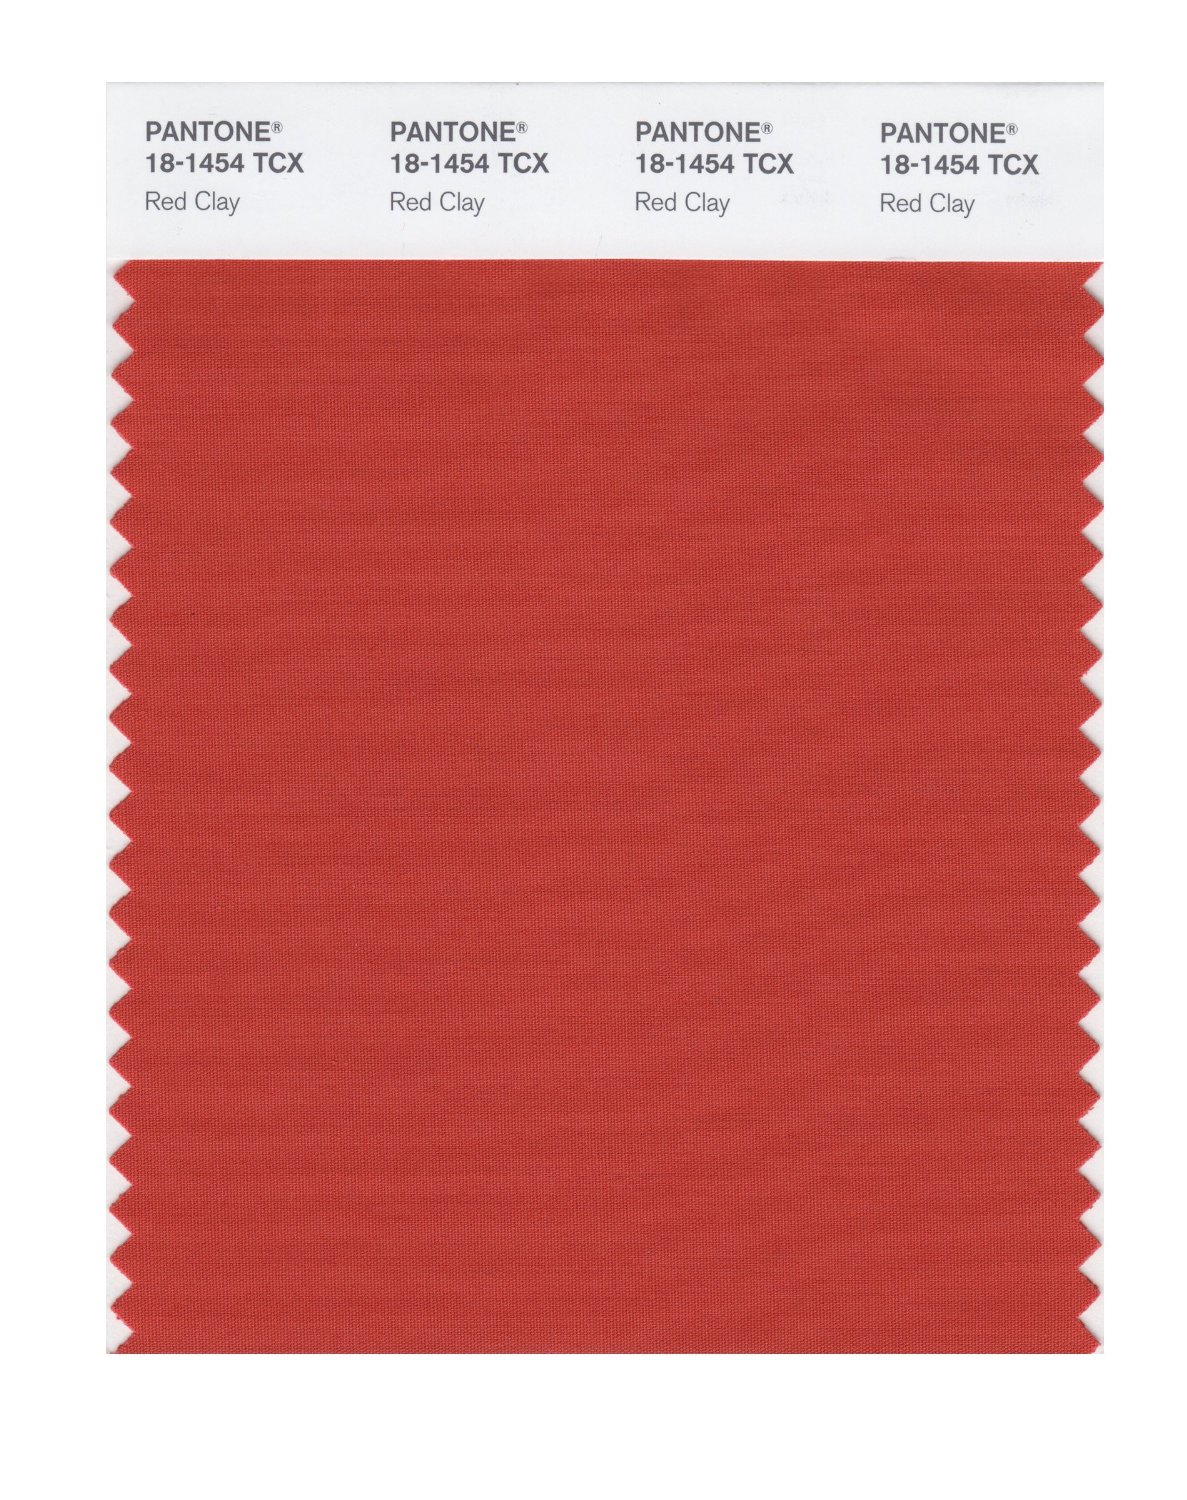 Pantone Cotton Swatch 18-1454 Red Clay